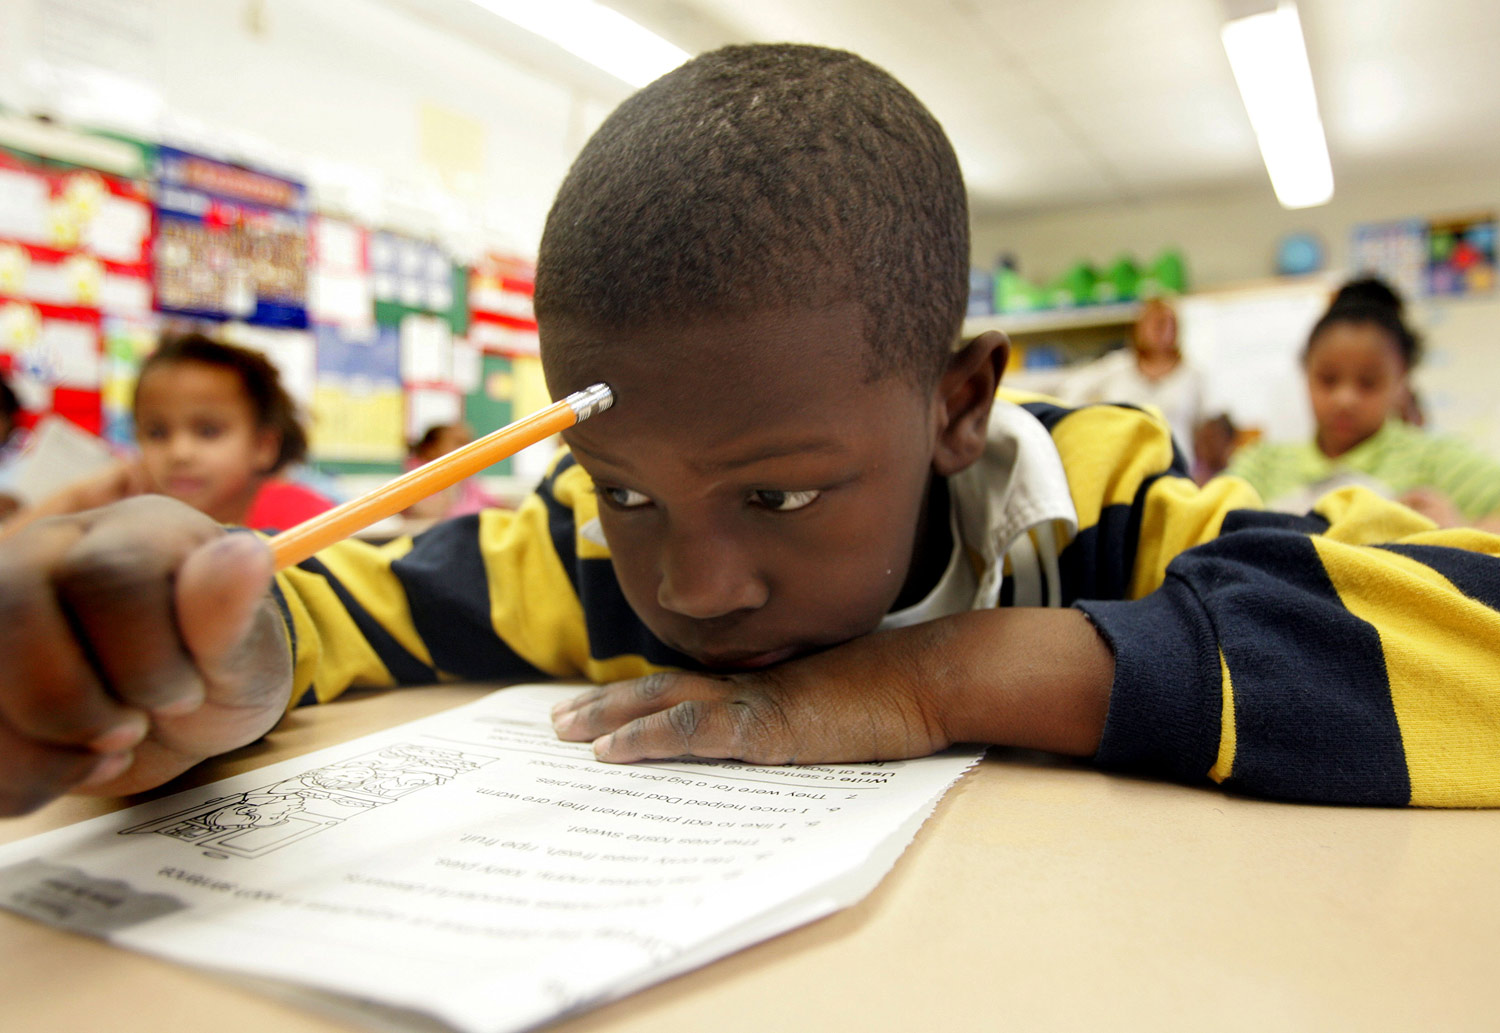 Senate Committee Votes to Kill No Child Left Behind, but the High-Stakes Testing Era Isn’t Over